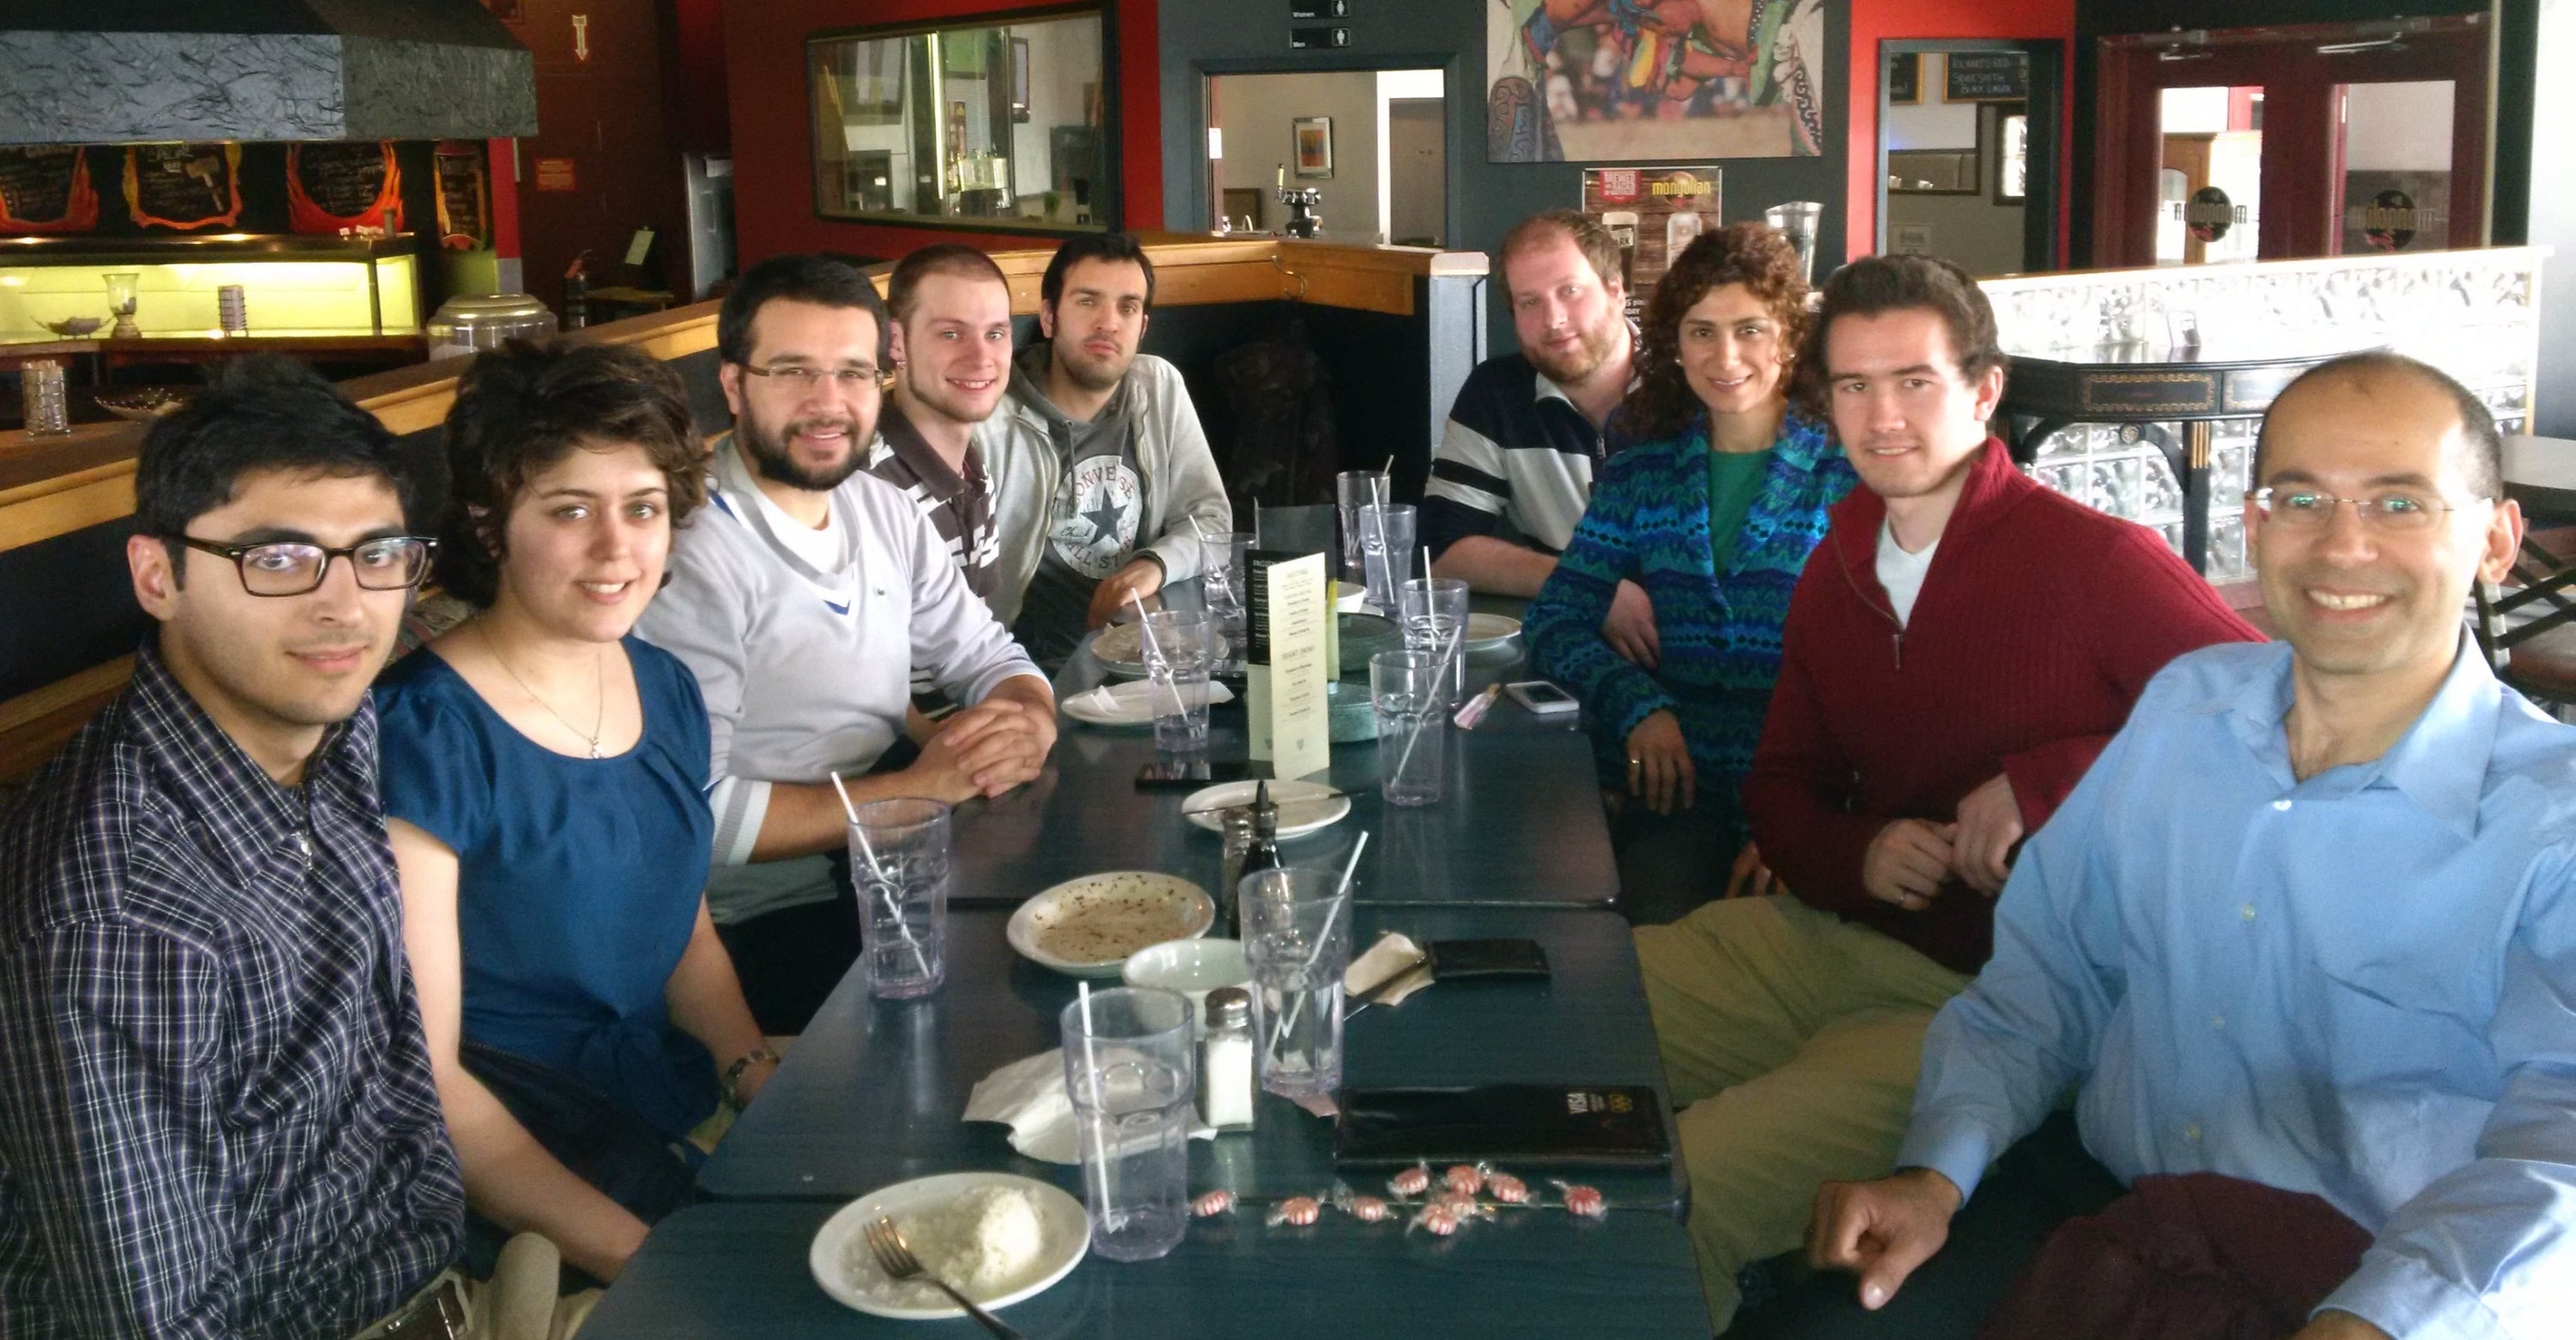 The STAR group at Mongolian Grill (March 2014).